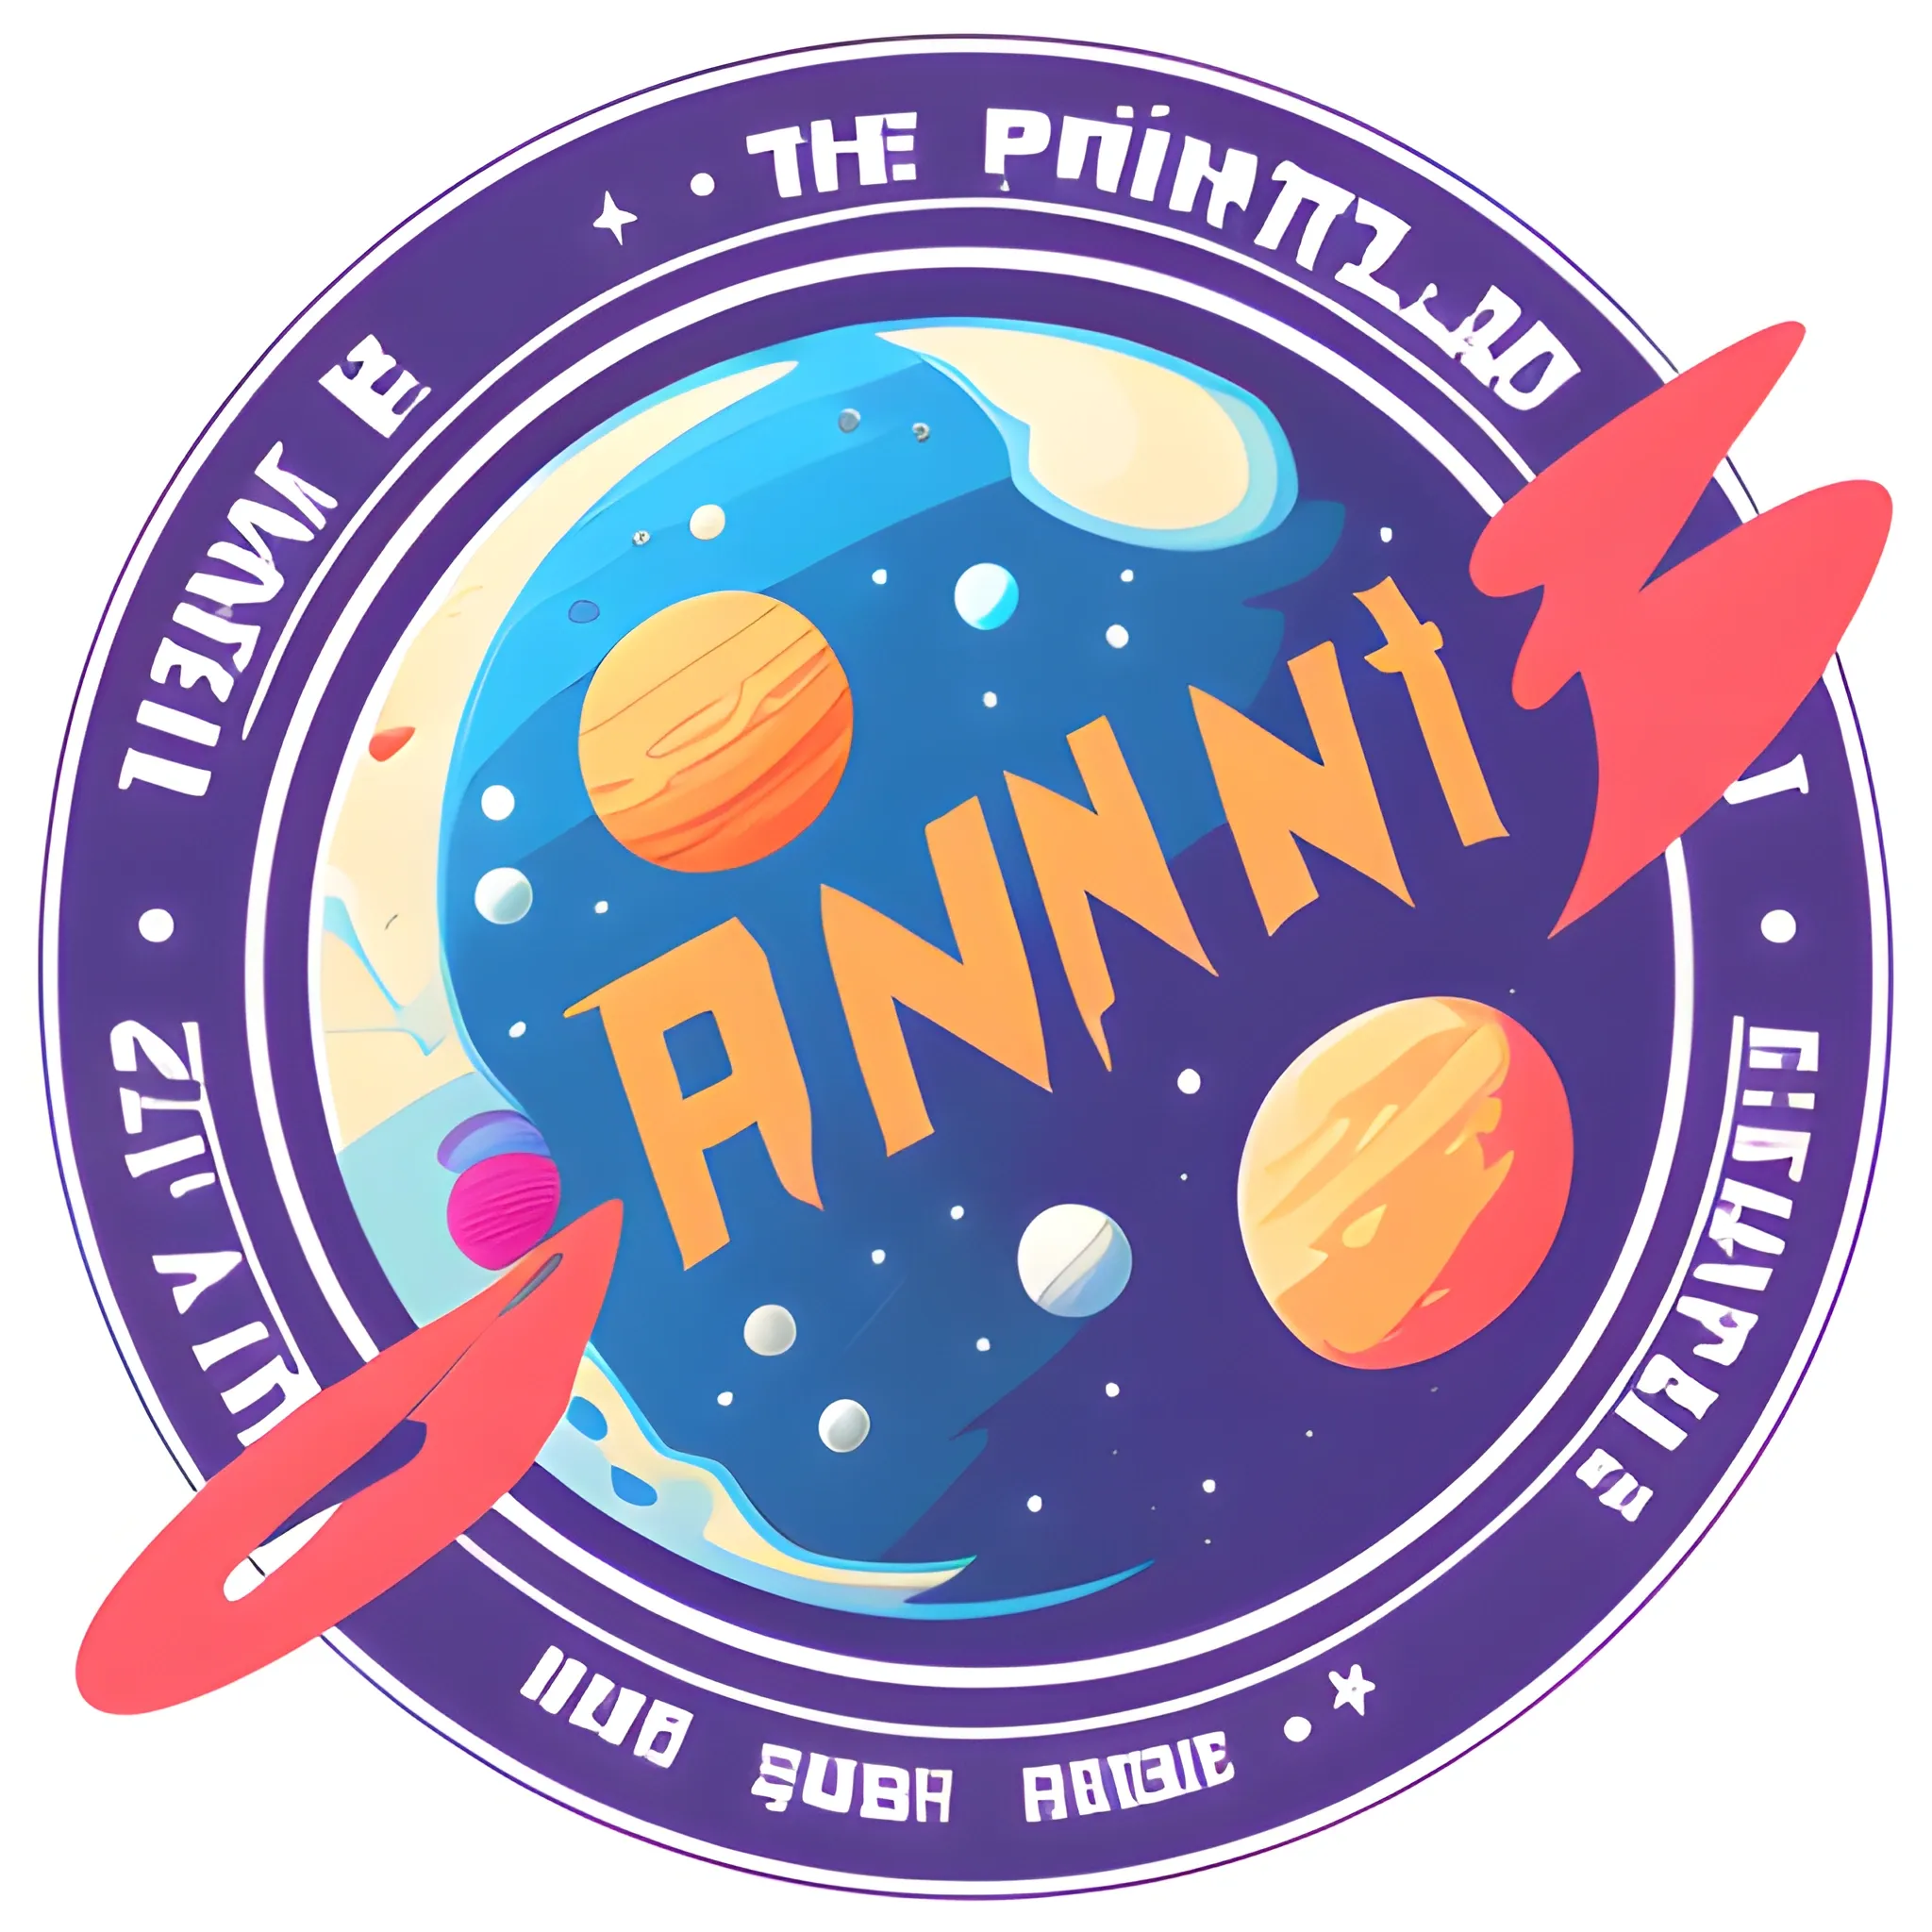 Make a vector logo for a printing shop. Name of the shop is Planet printing hub.